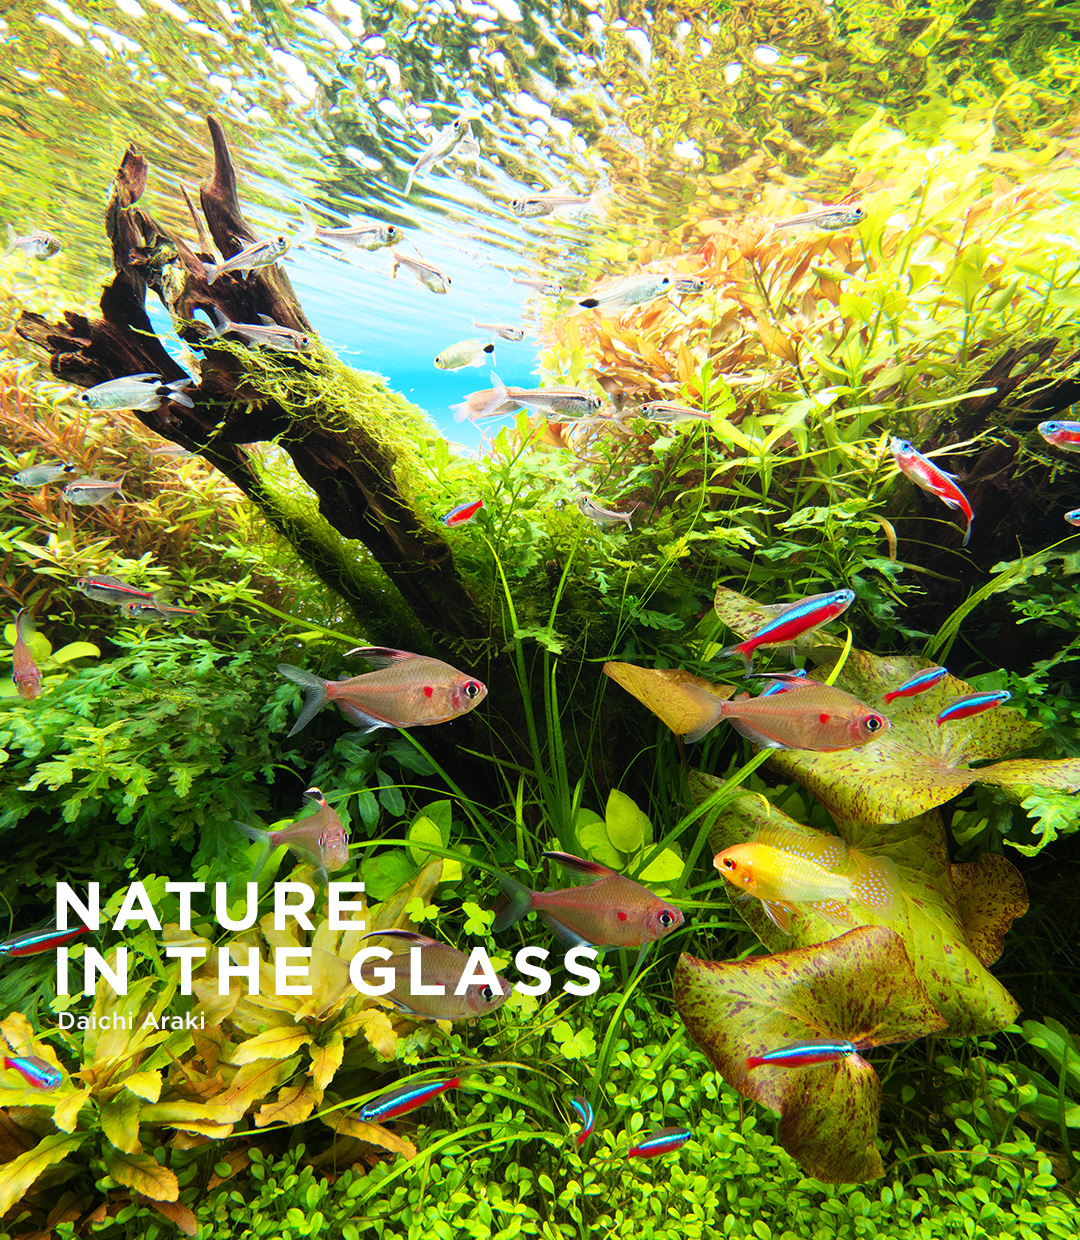 NATURE IN THE GLASS “Relaxing Aquascape”